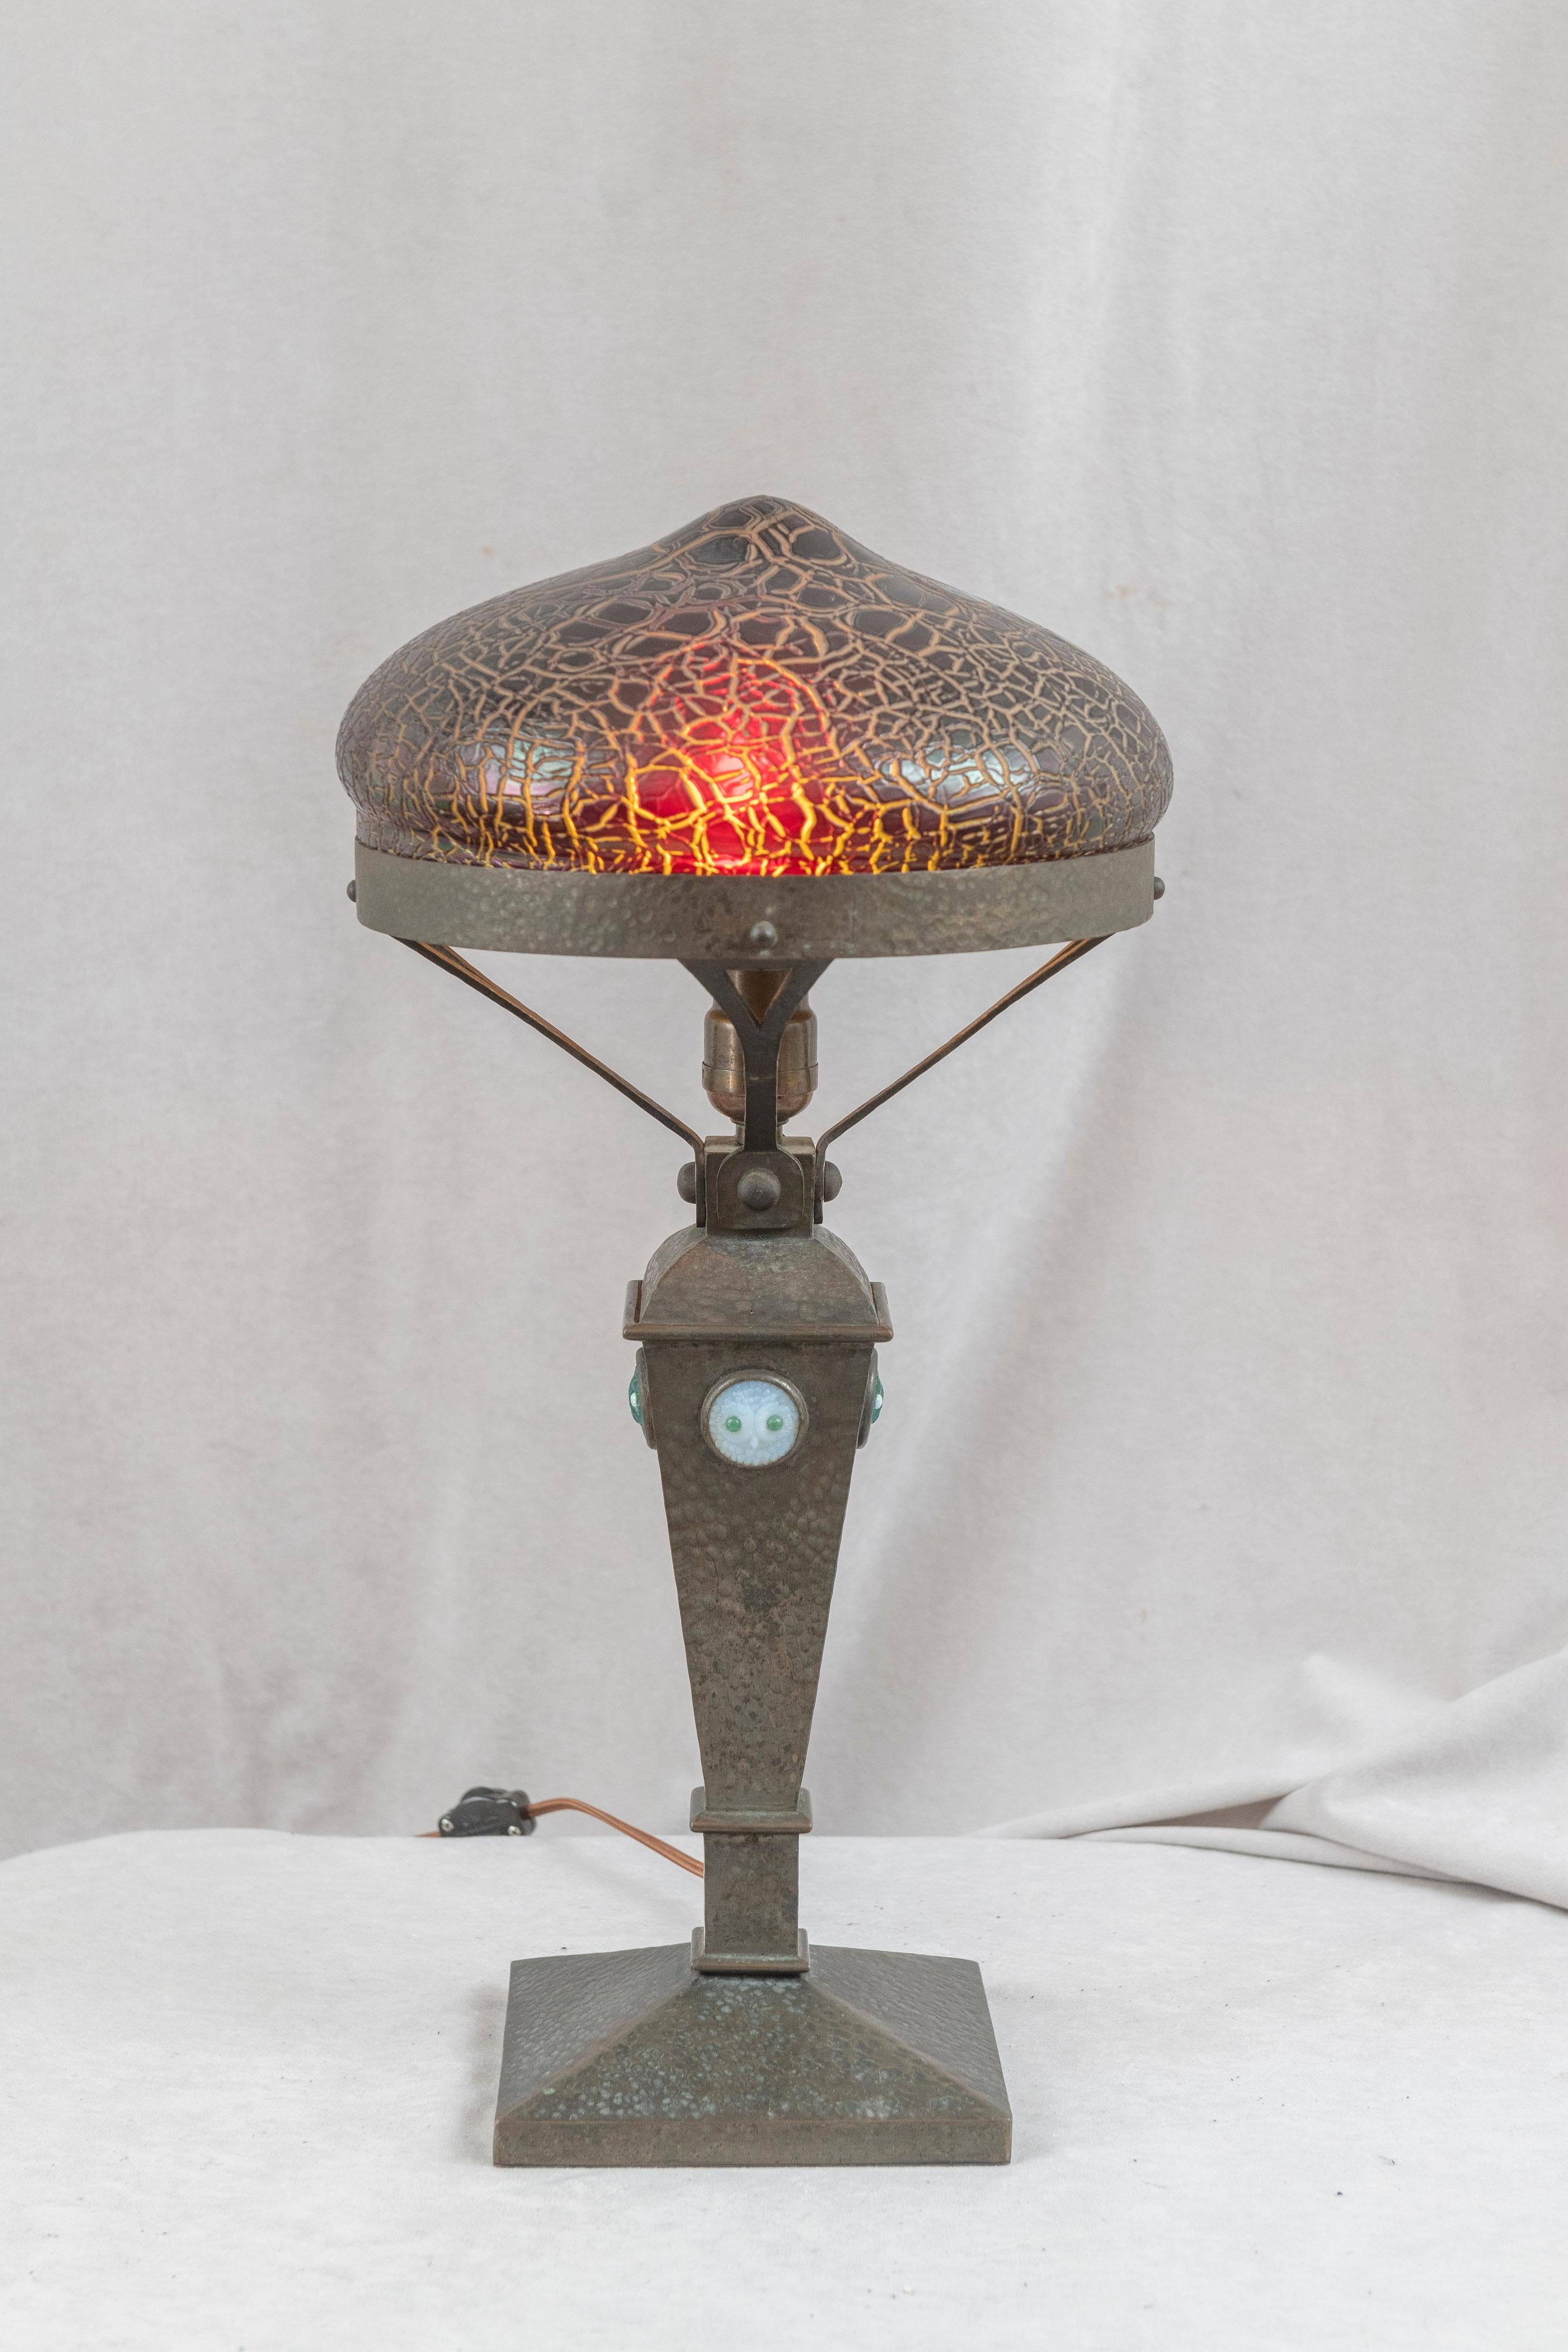 This very special table lamp has many unique and distinct qualities. The richly patinated base, done in the arts & crafts tradition is hammered and on all 4 sides displays glass jewels with owls faces cast in the glass. 2 of the jewels are dark